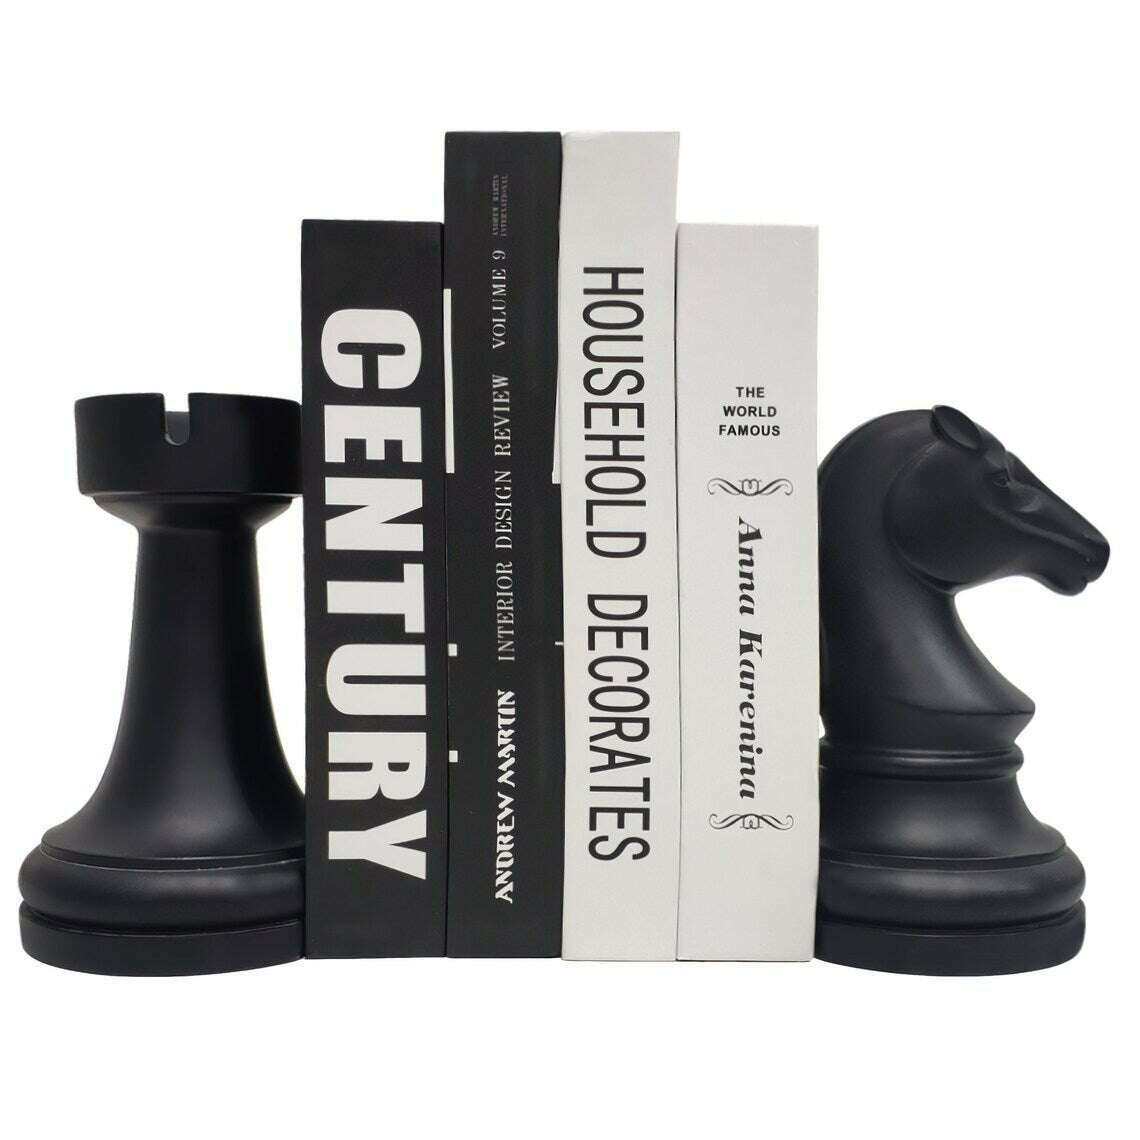 Impodimo Living & Giving:Knight & Castle Bookends:Swing Gifts